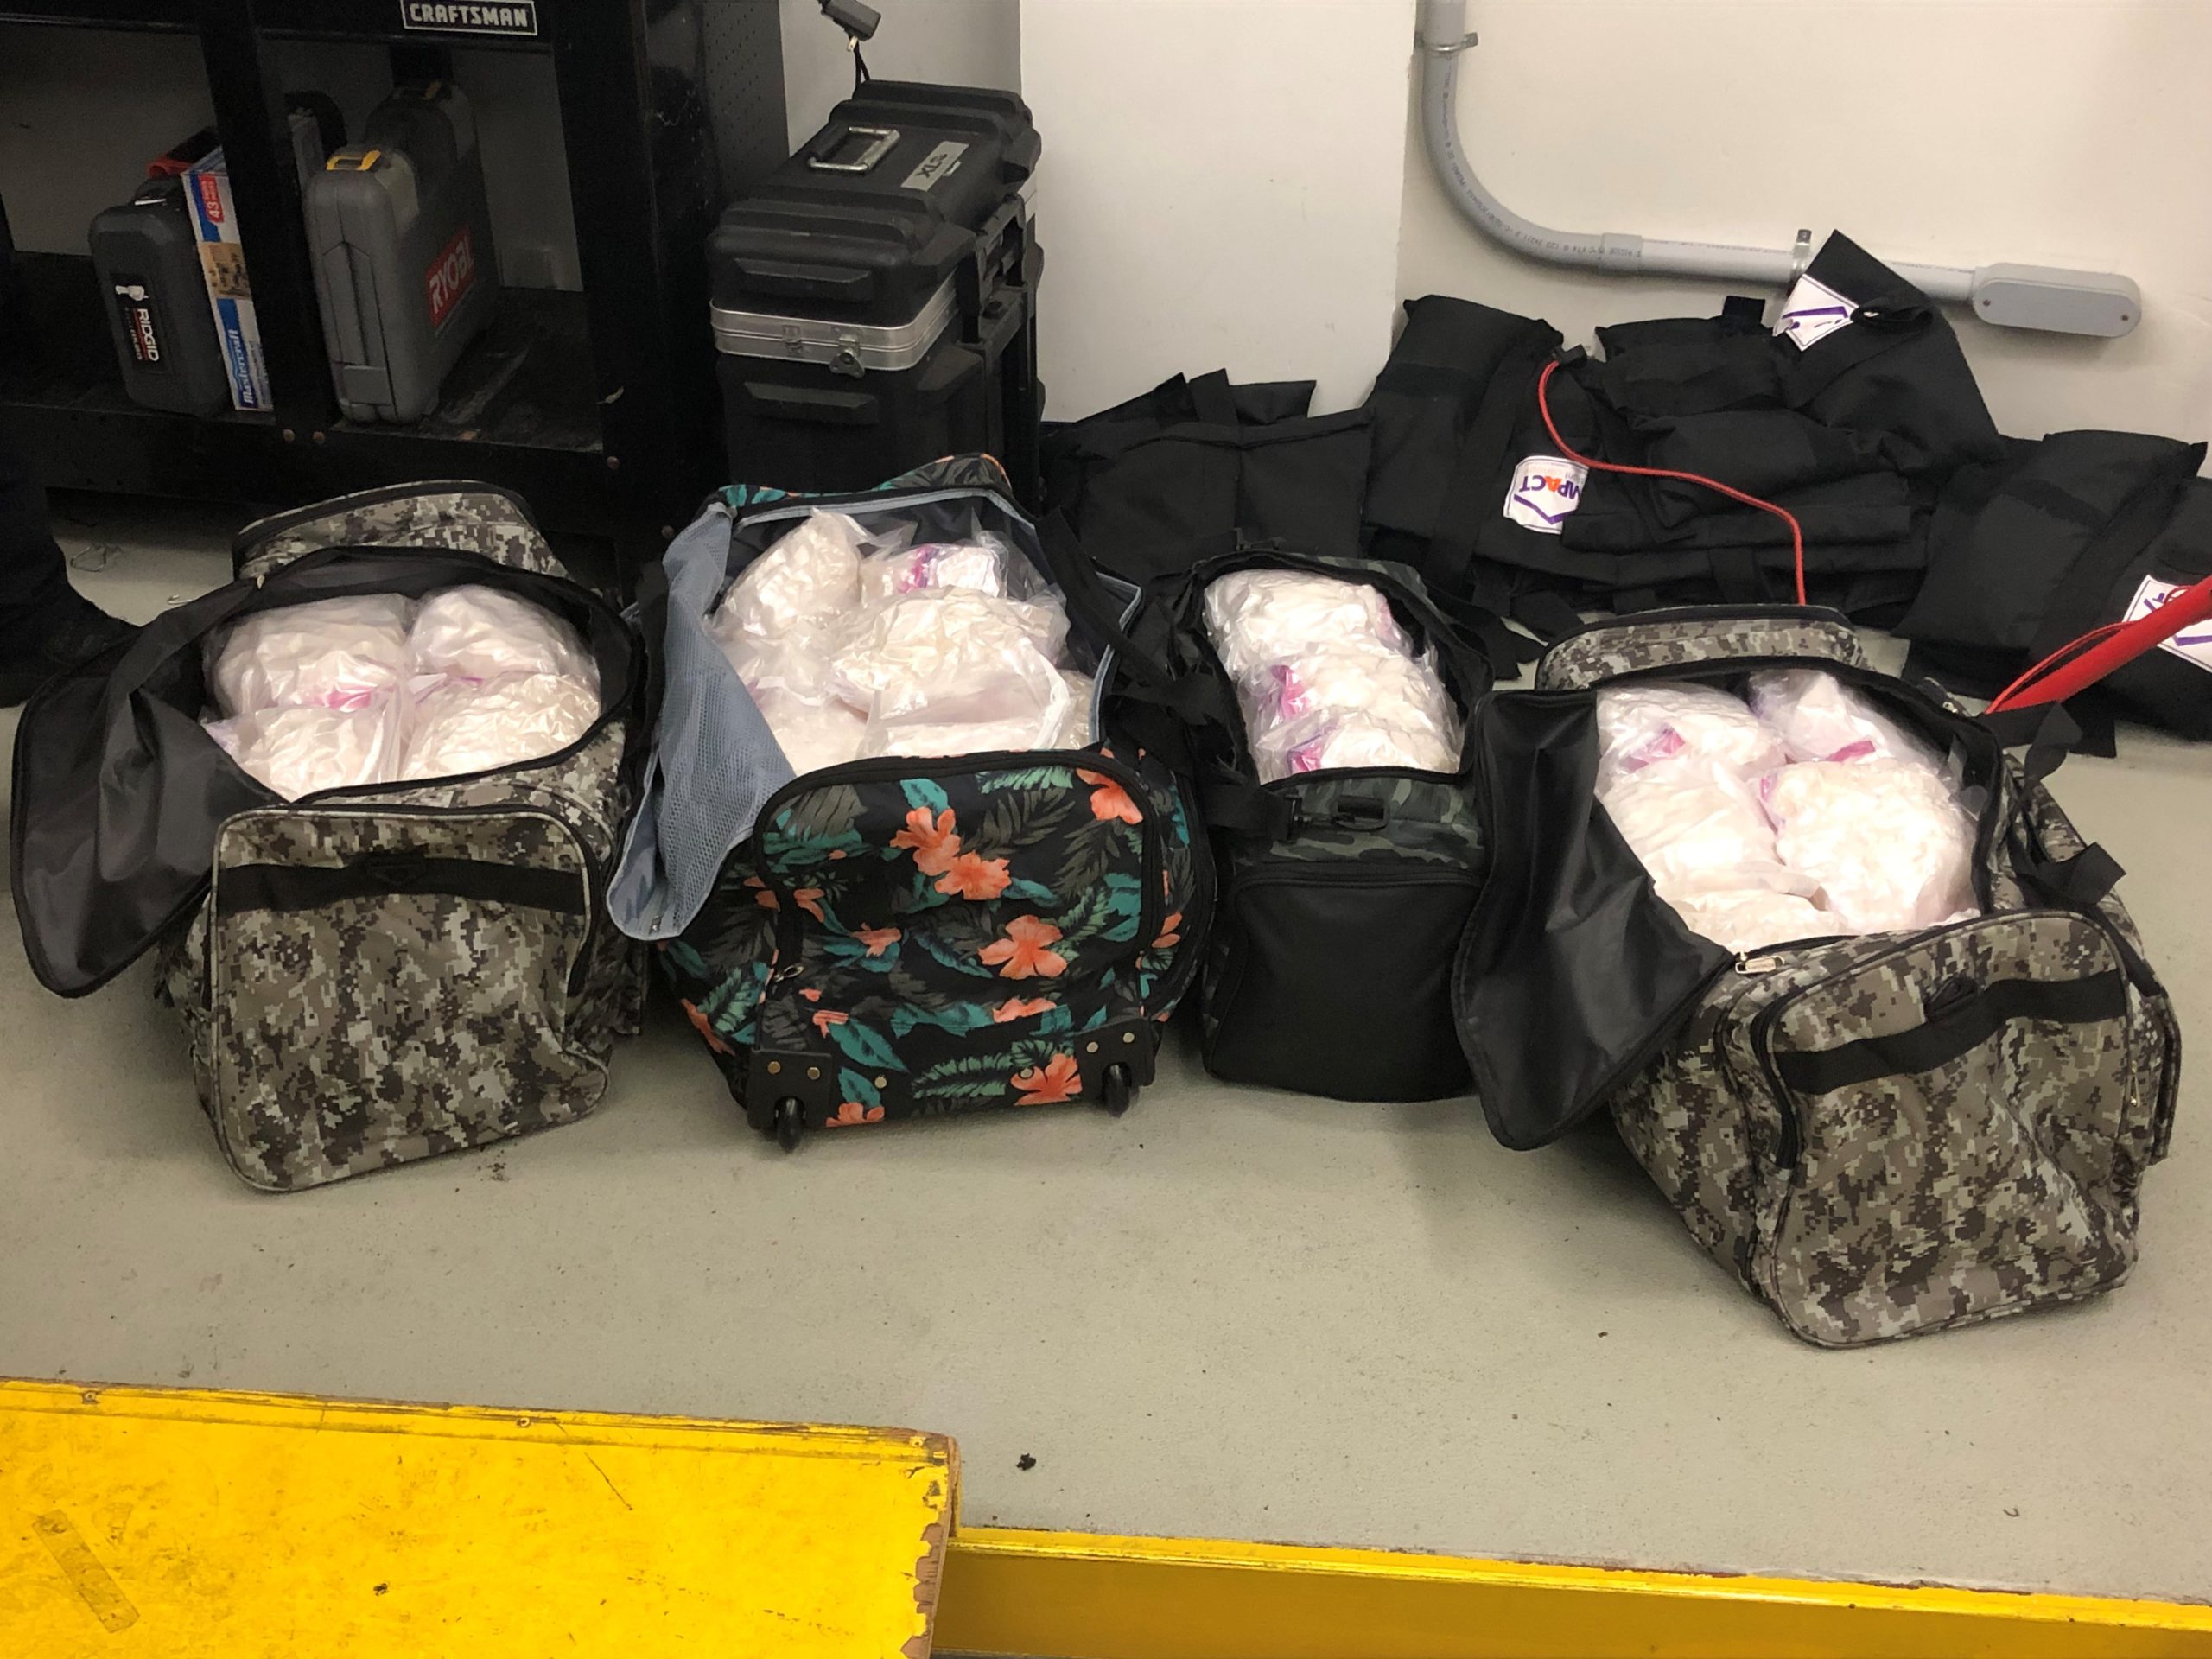 Large Consignment of drugs seized at Pacific Highway Border in Surrey